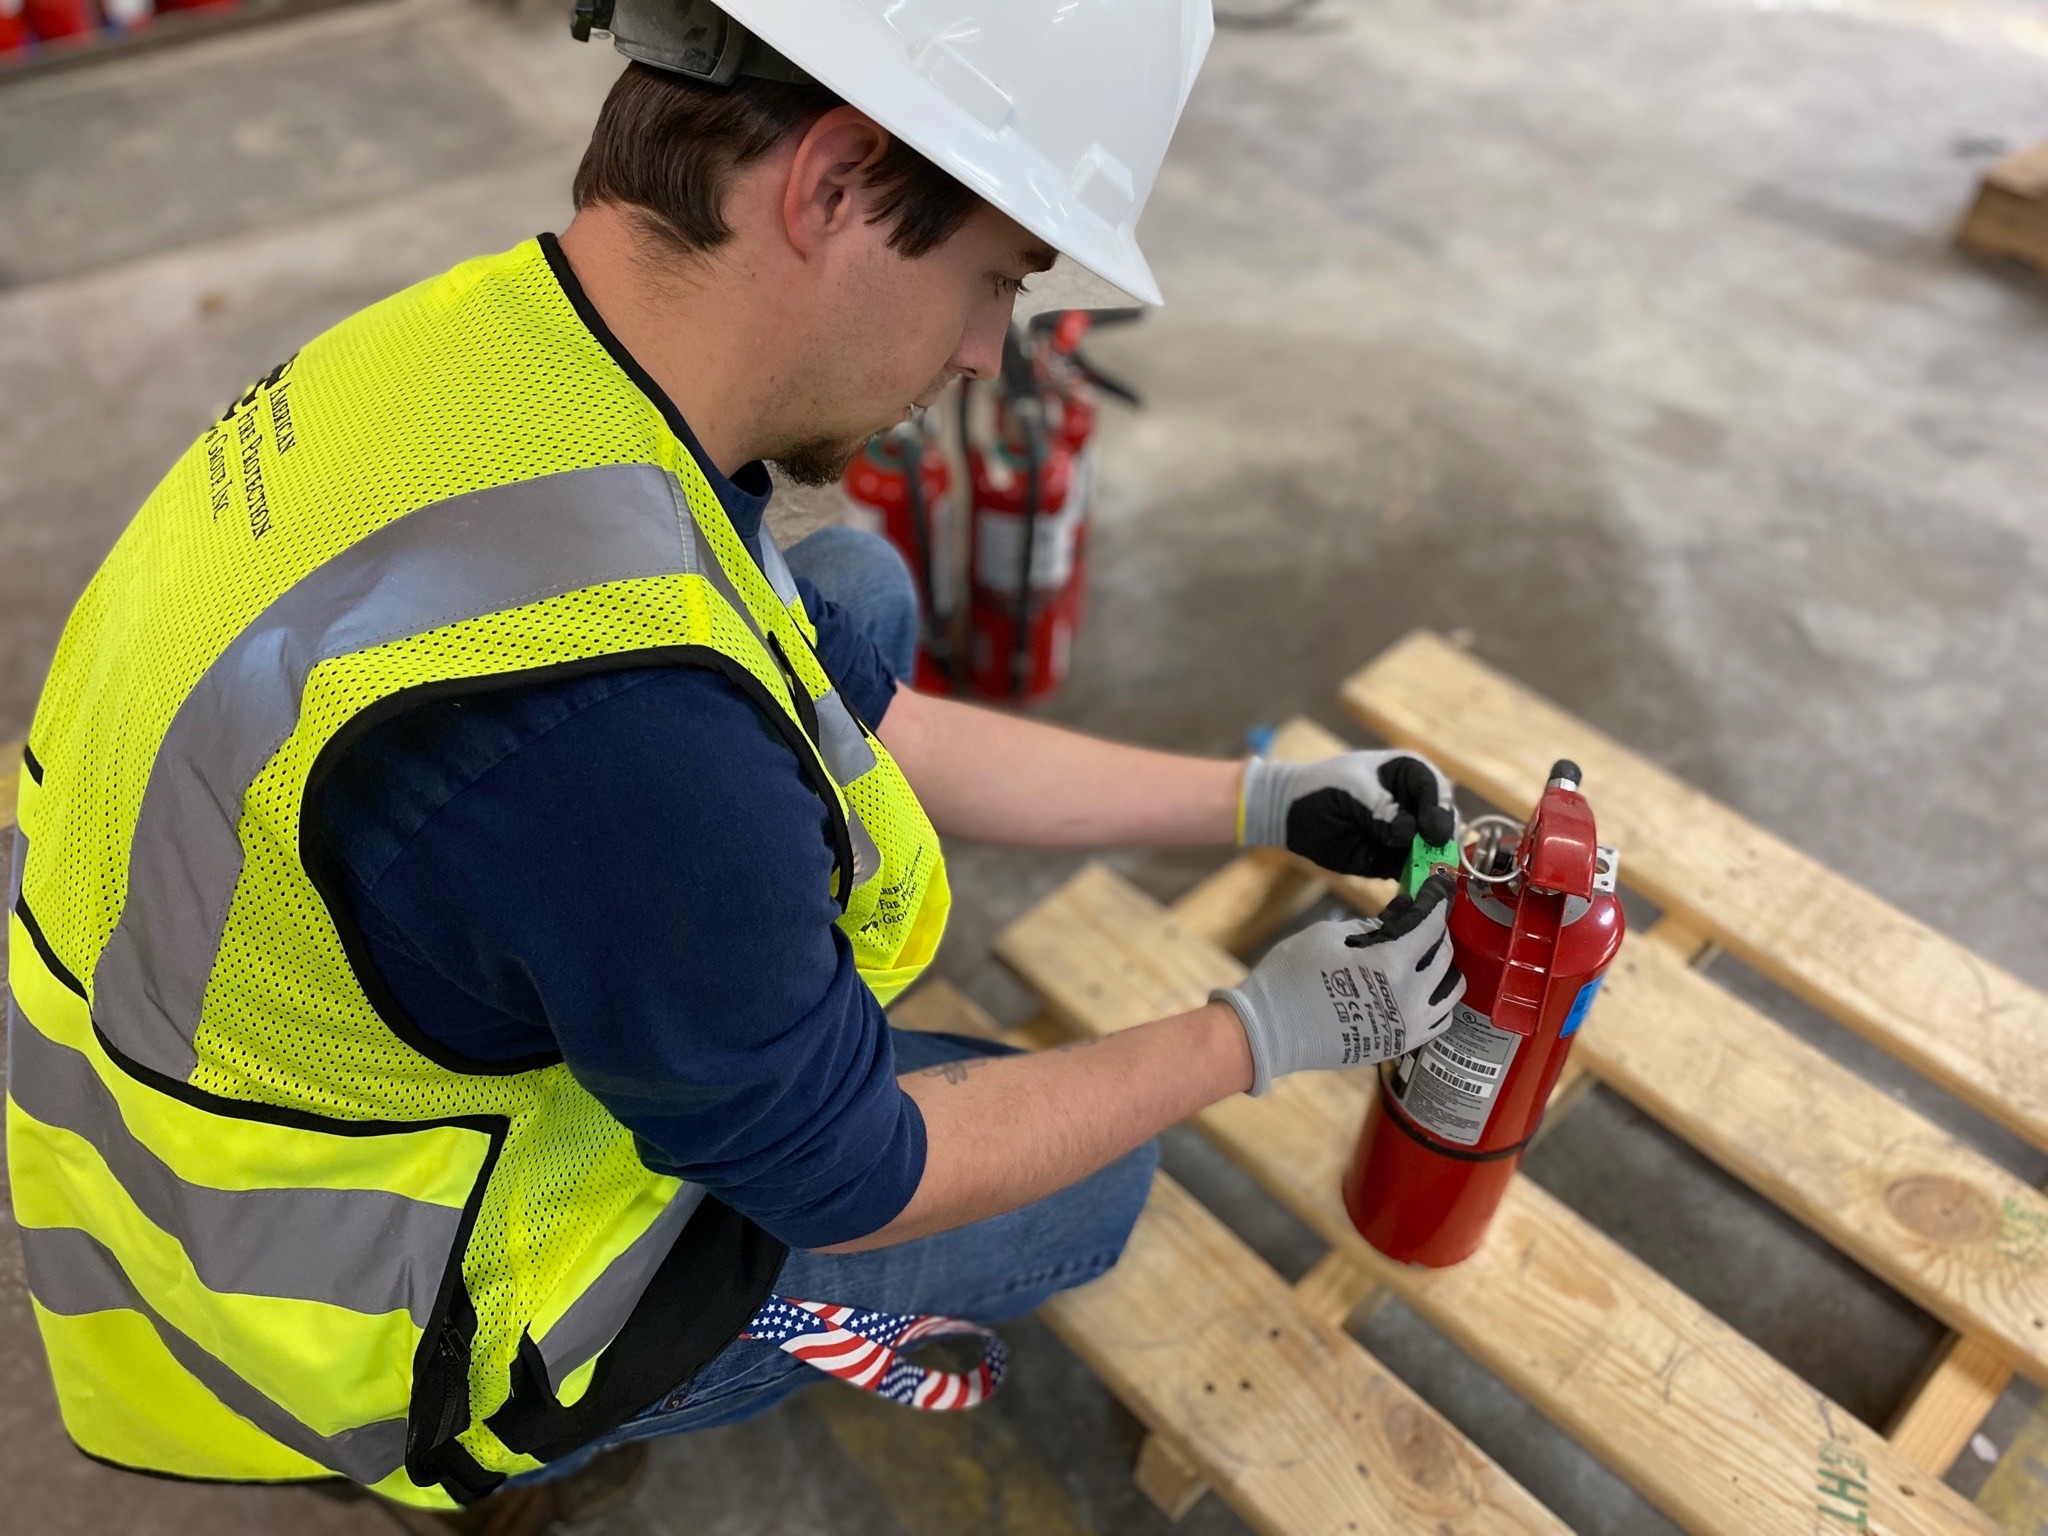 Fire Extinguisher Inspections: Everything You Need to Know About Annual, 6-Year, and 12-Year Inspections and Maintenance